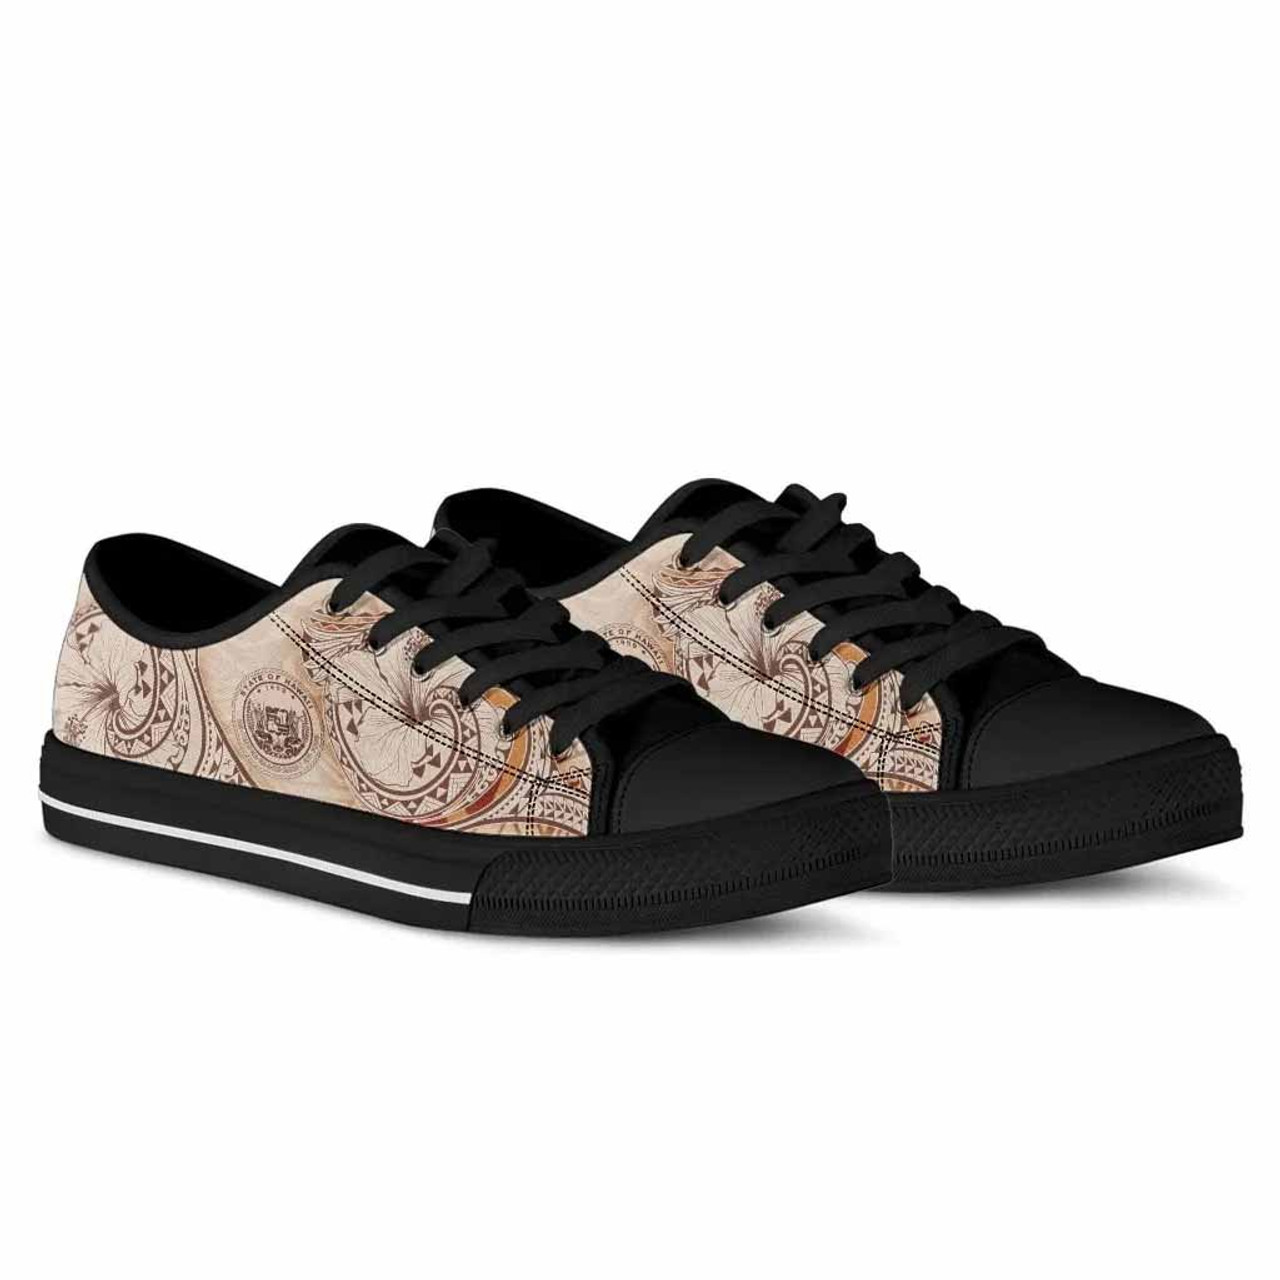 Hawaii Low Top Shoes - Hibiscus Flowers Vintage Style 8